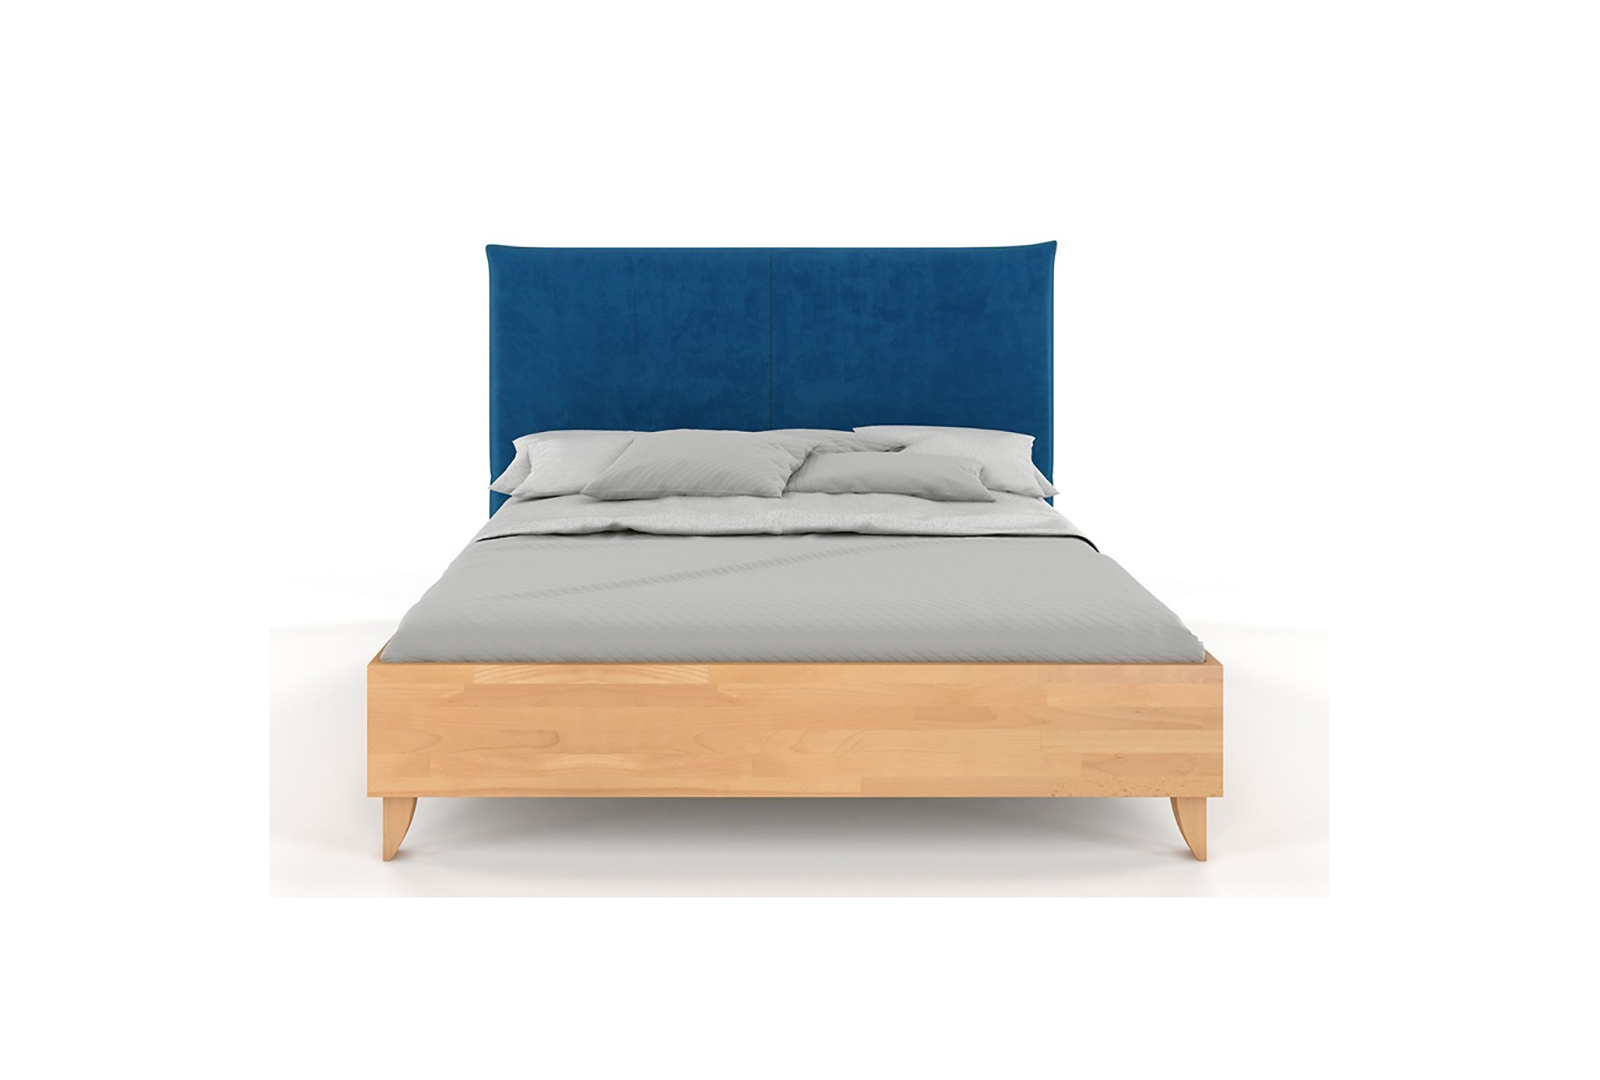 VISBY VIVIEN WOODEN BEECH BED WITH AN UPHOLSTERED HEADBOARD